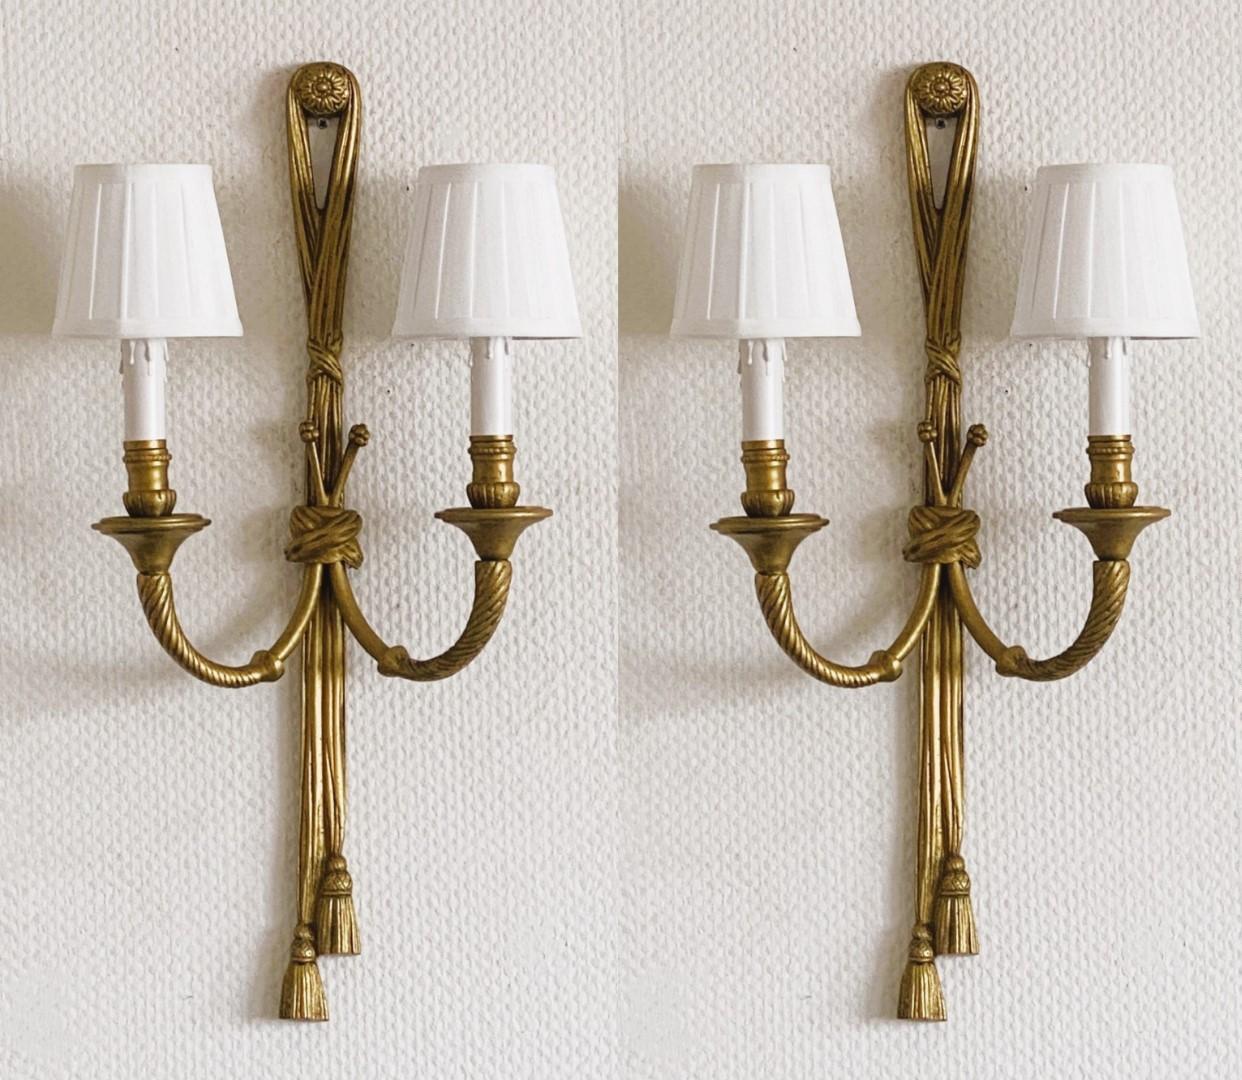 A very elegante pair of tall Louis XVI style gilt bronze wall sconces, France, early 20th century. Two light-arm richly decorated with scrollwork foliage, bottom ending in Tassel & Ribbon form. High quality solid bronze fire-gilded finish,